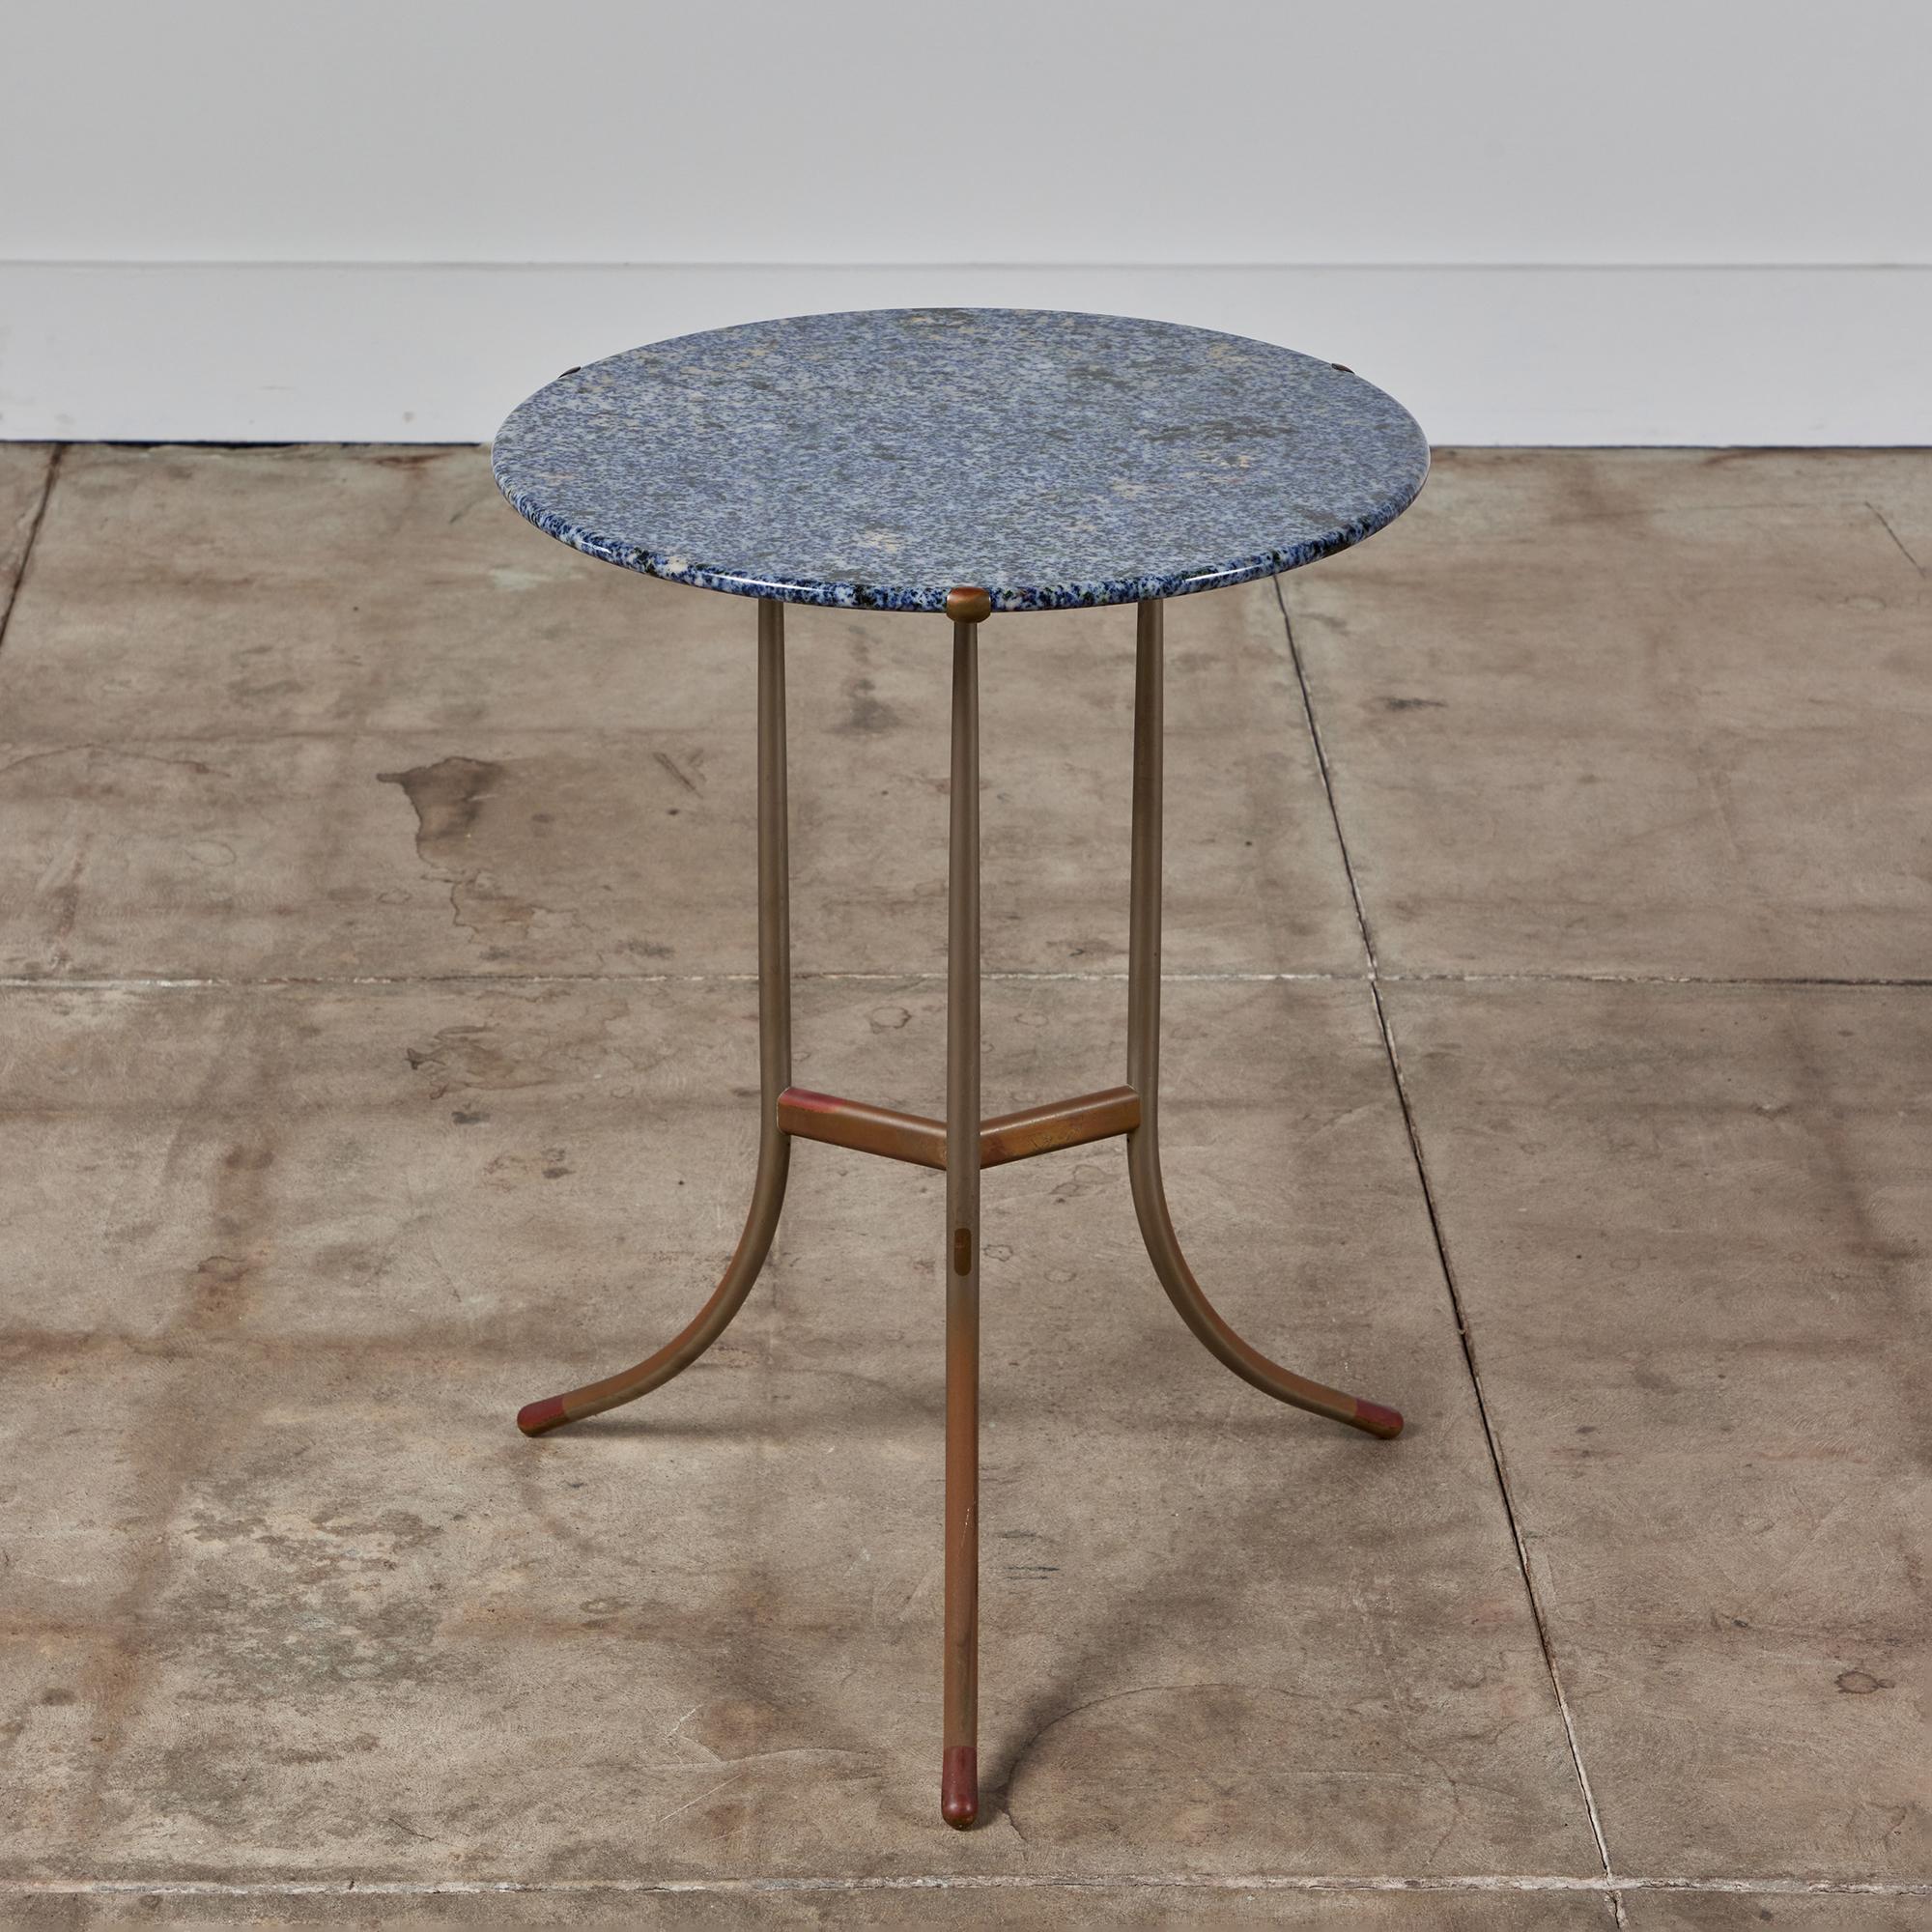 Cedric Hartman mixed metal and granite side table, circa.1970s, USA. The round striking blue granite stone table top showcases a cream and black veining. The table top rests inside three delicate copper prongs. The table features a pedestal base